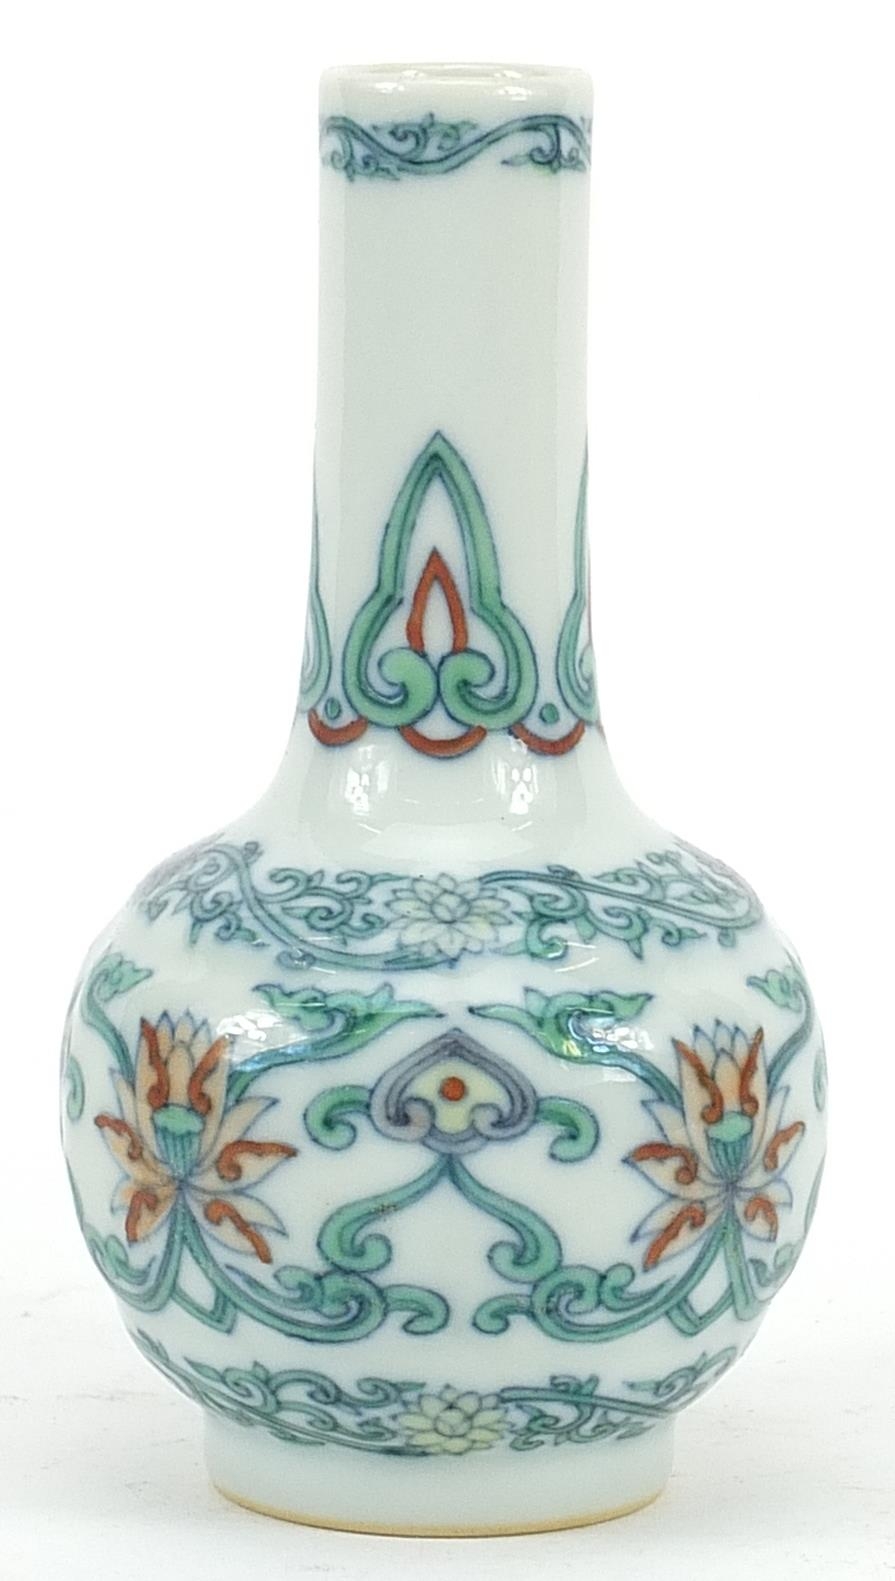 Chinese doucai porcelain vase hand painted with flower heads amongst scrolling foliage, six figure - Image 2 of 3